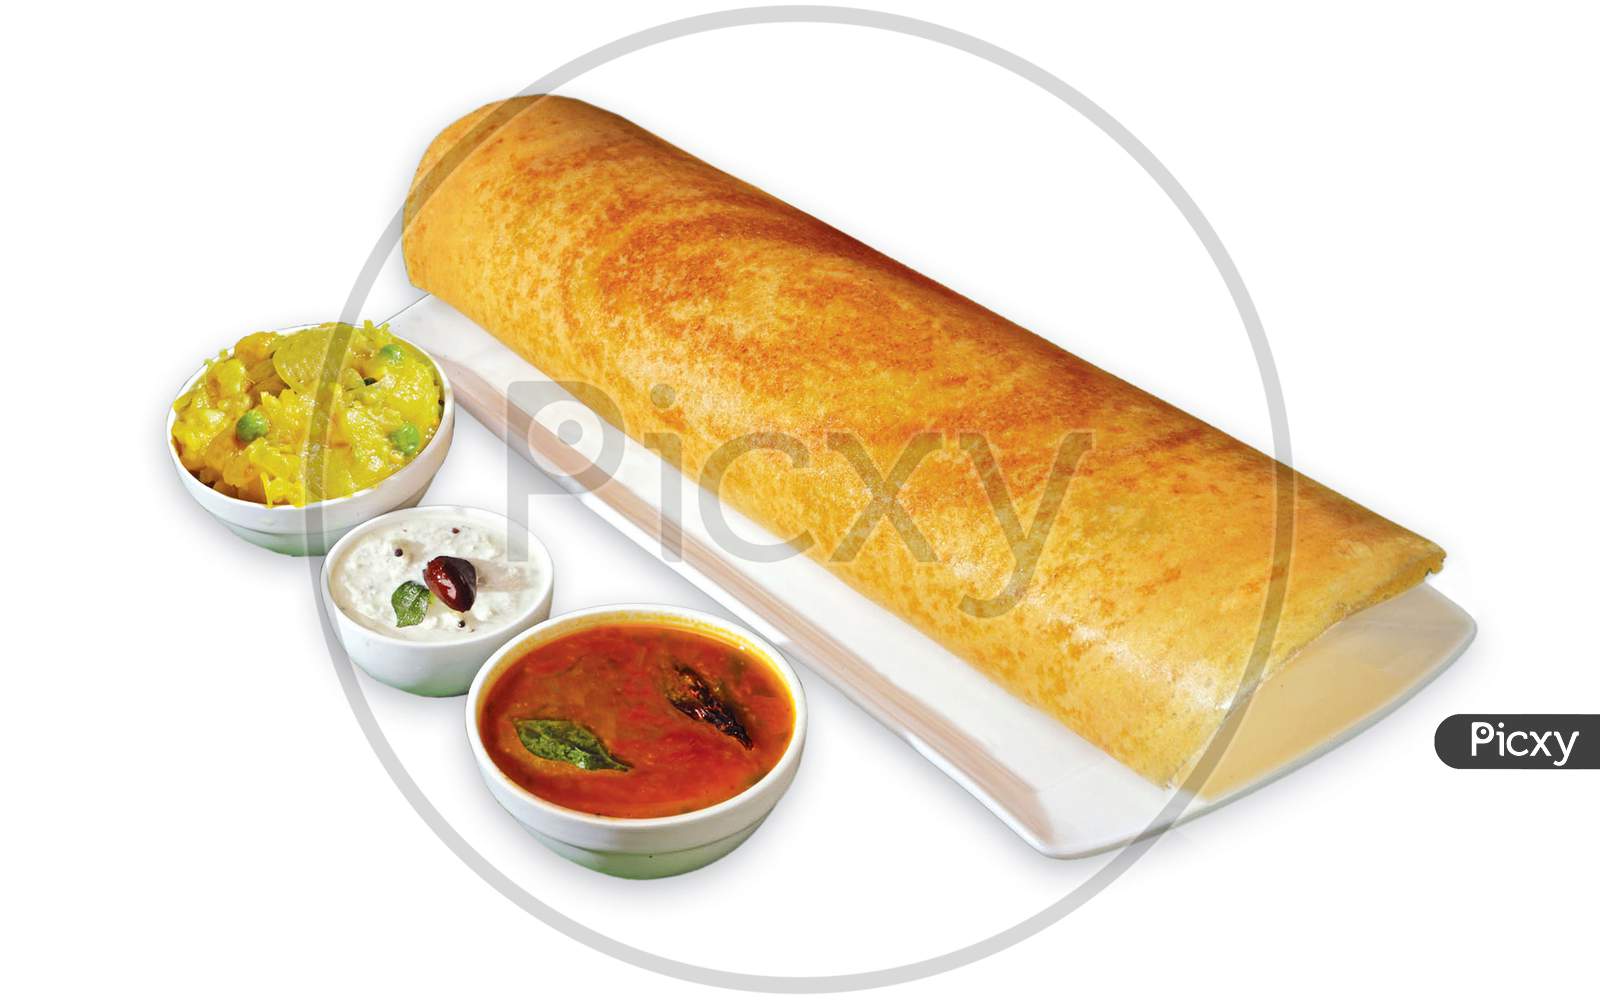 South Indian Masala Dhosa Or Dosa Served With Sambhar, Coconut Chutney, Red Chutney And Green Chutney, South Indian Breakfast